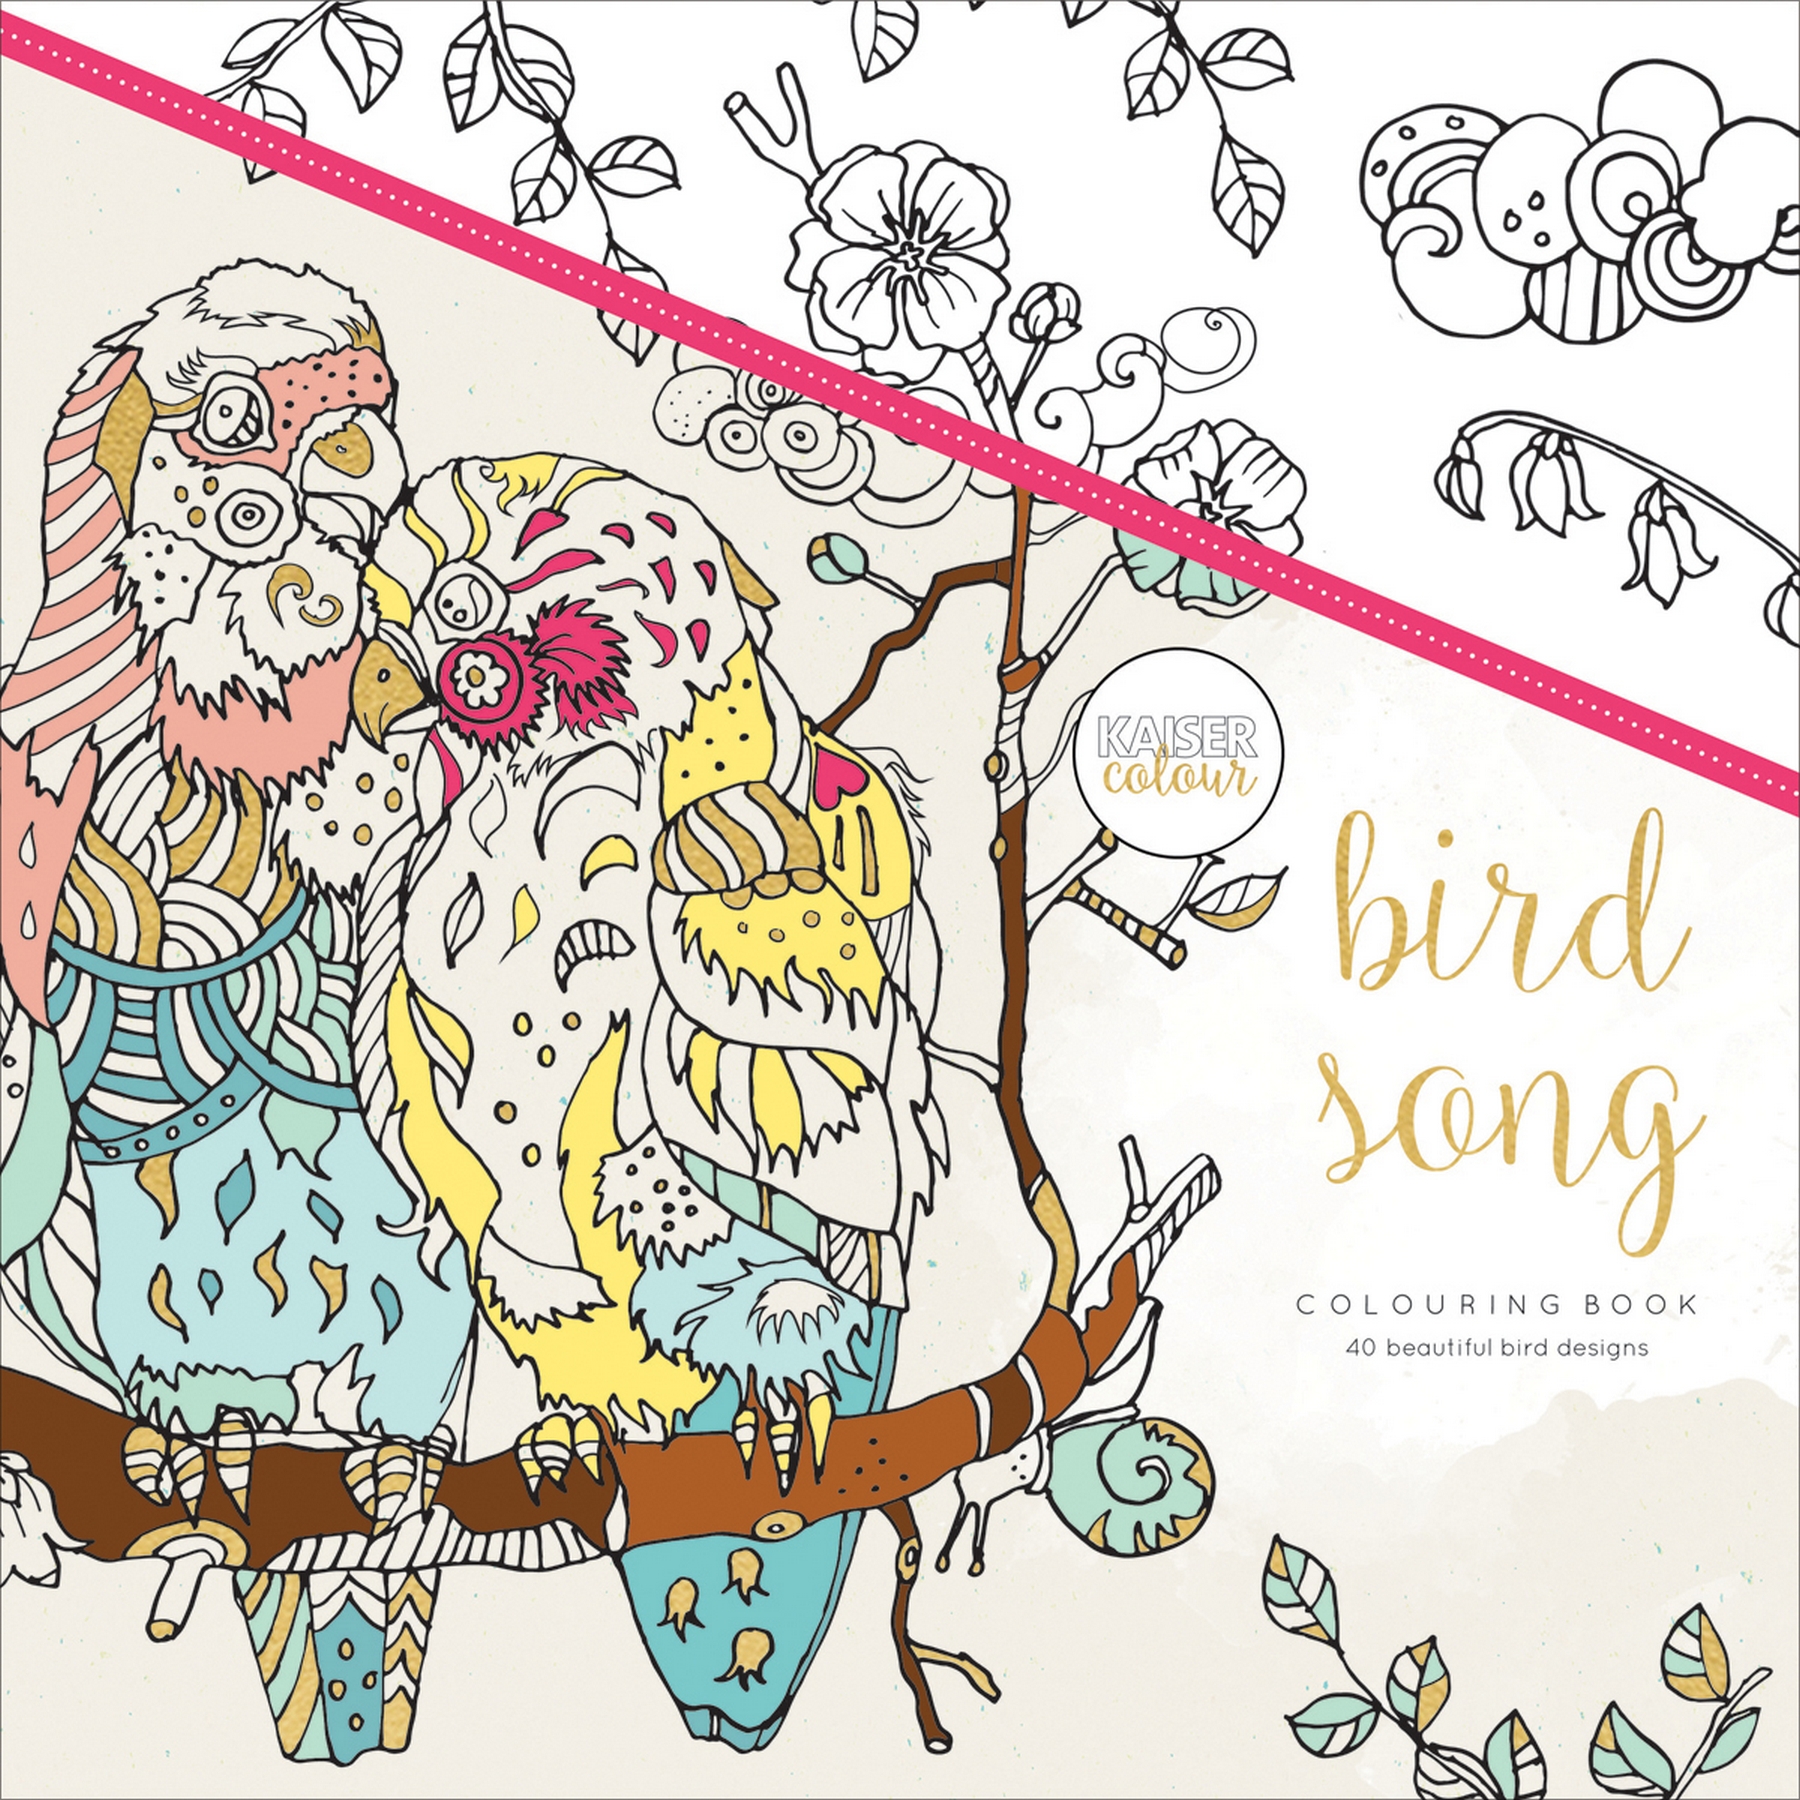 ISBN 9781925405170 product image for KaiserColour Perfect Bound Coloring Book Bird Song | upcitemdb.com